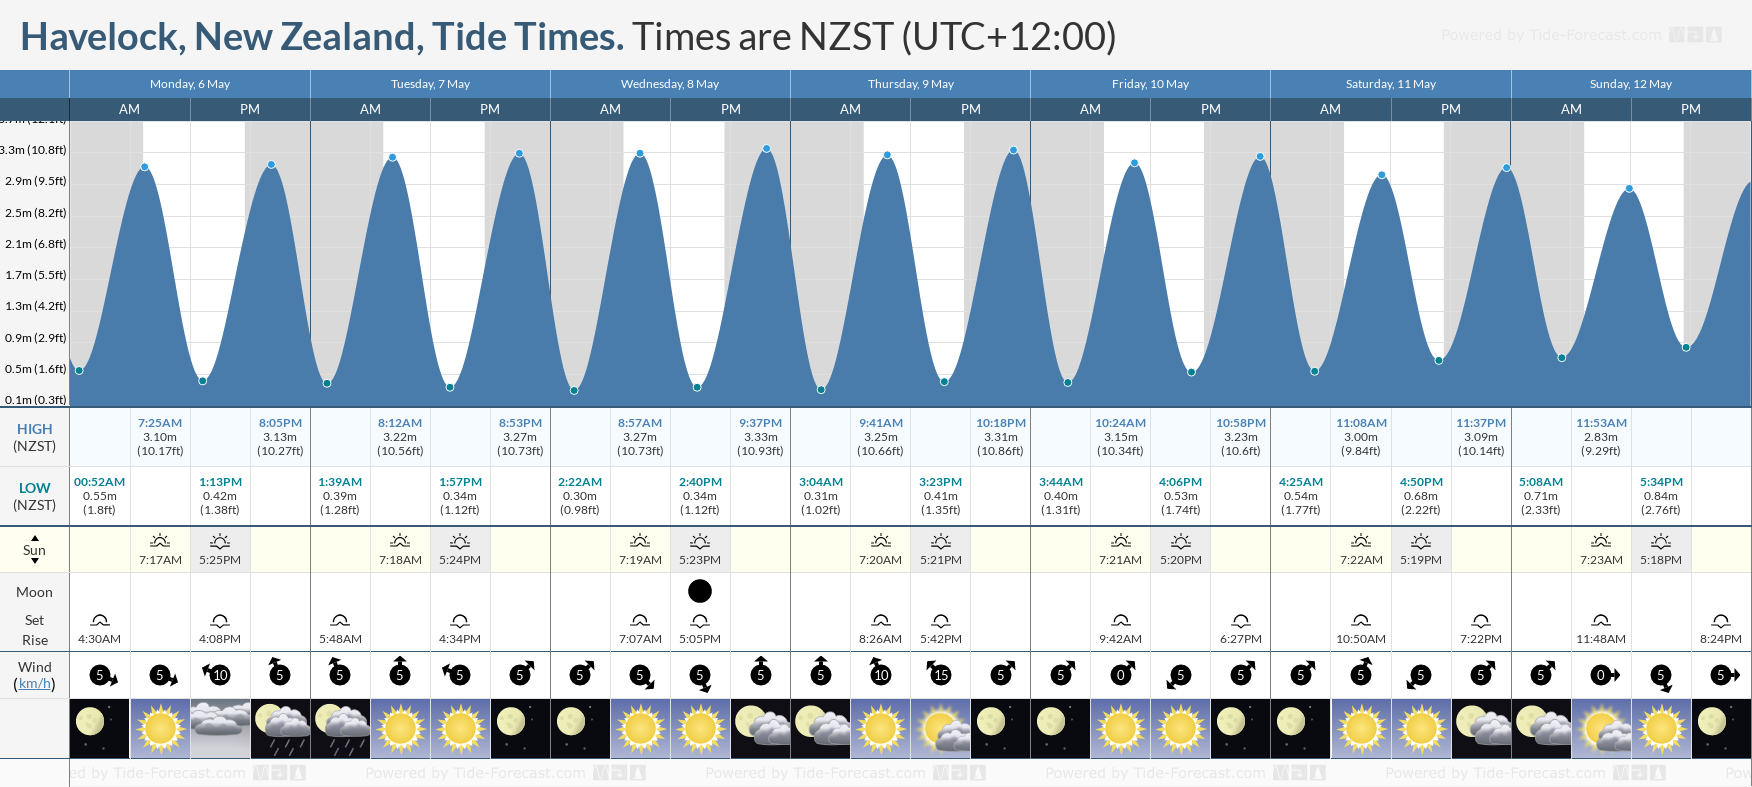 Havelock, New Zealand Tide Chart including high and low tide tide times for the next 7 days